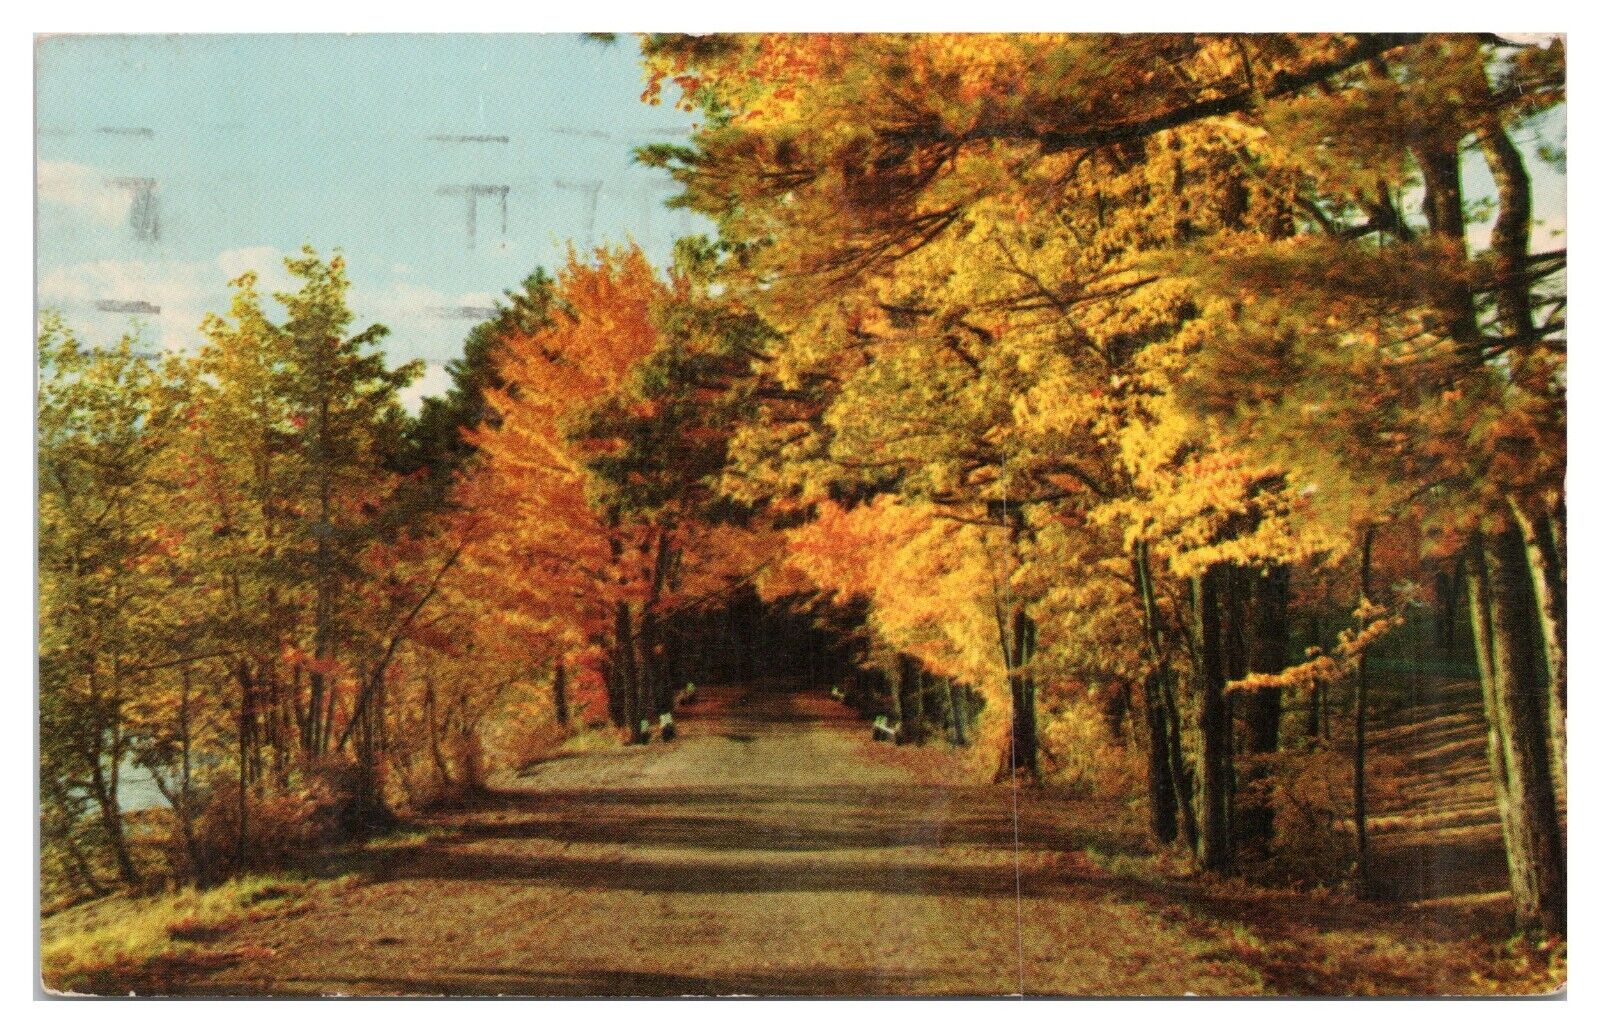 Vintage Beautiful Highway Scenery NY State Postcard c1957 Chrome